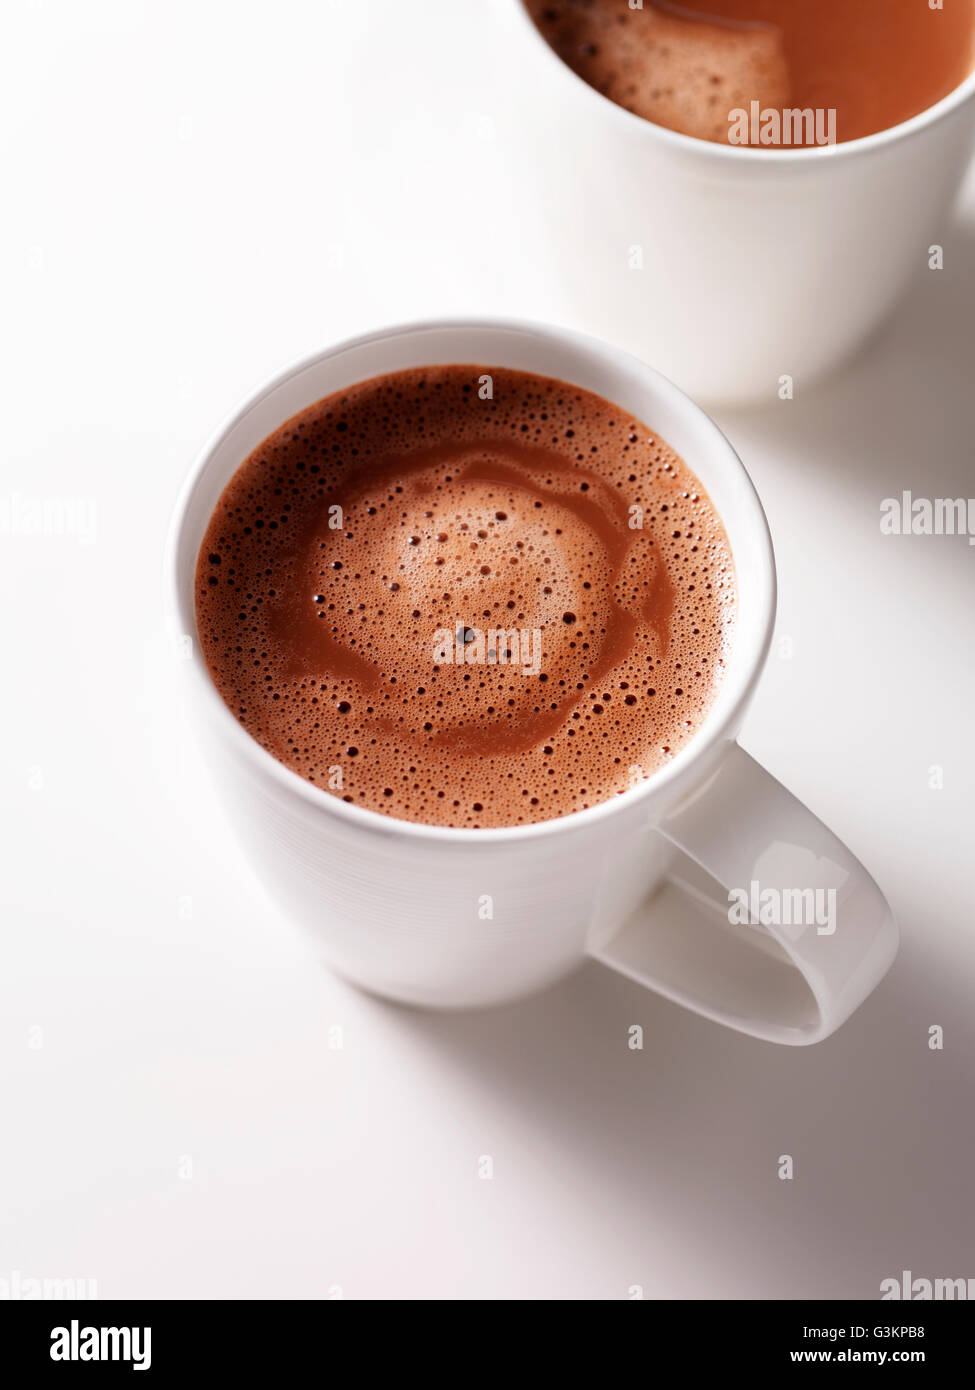 Two hot chocolate drinks Stock Photo